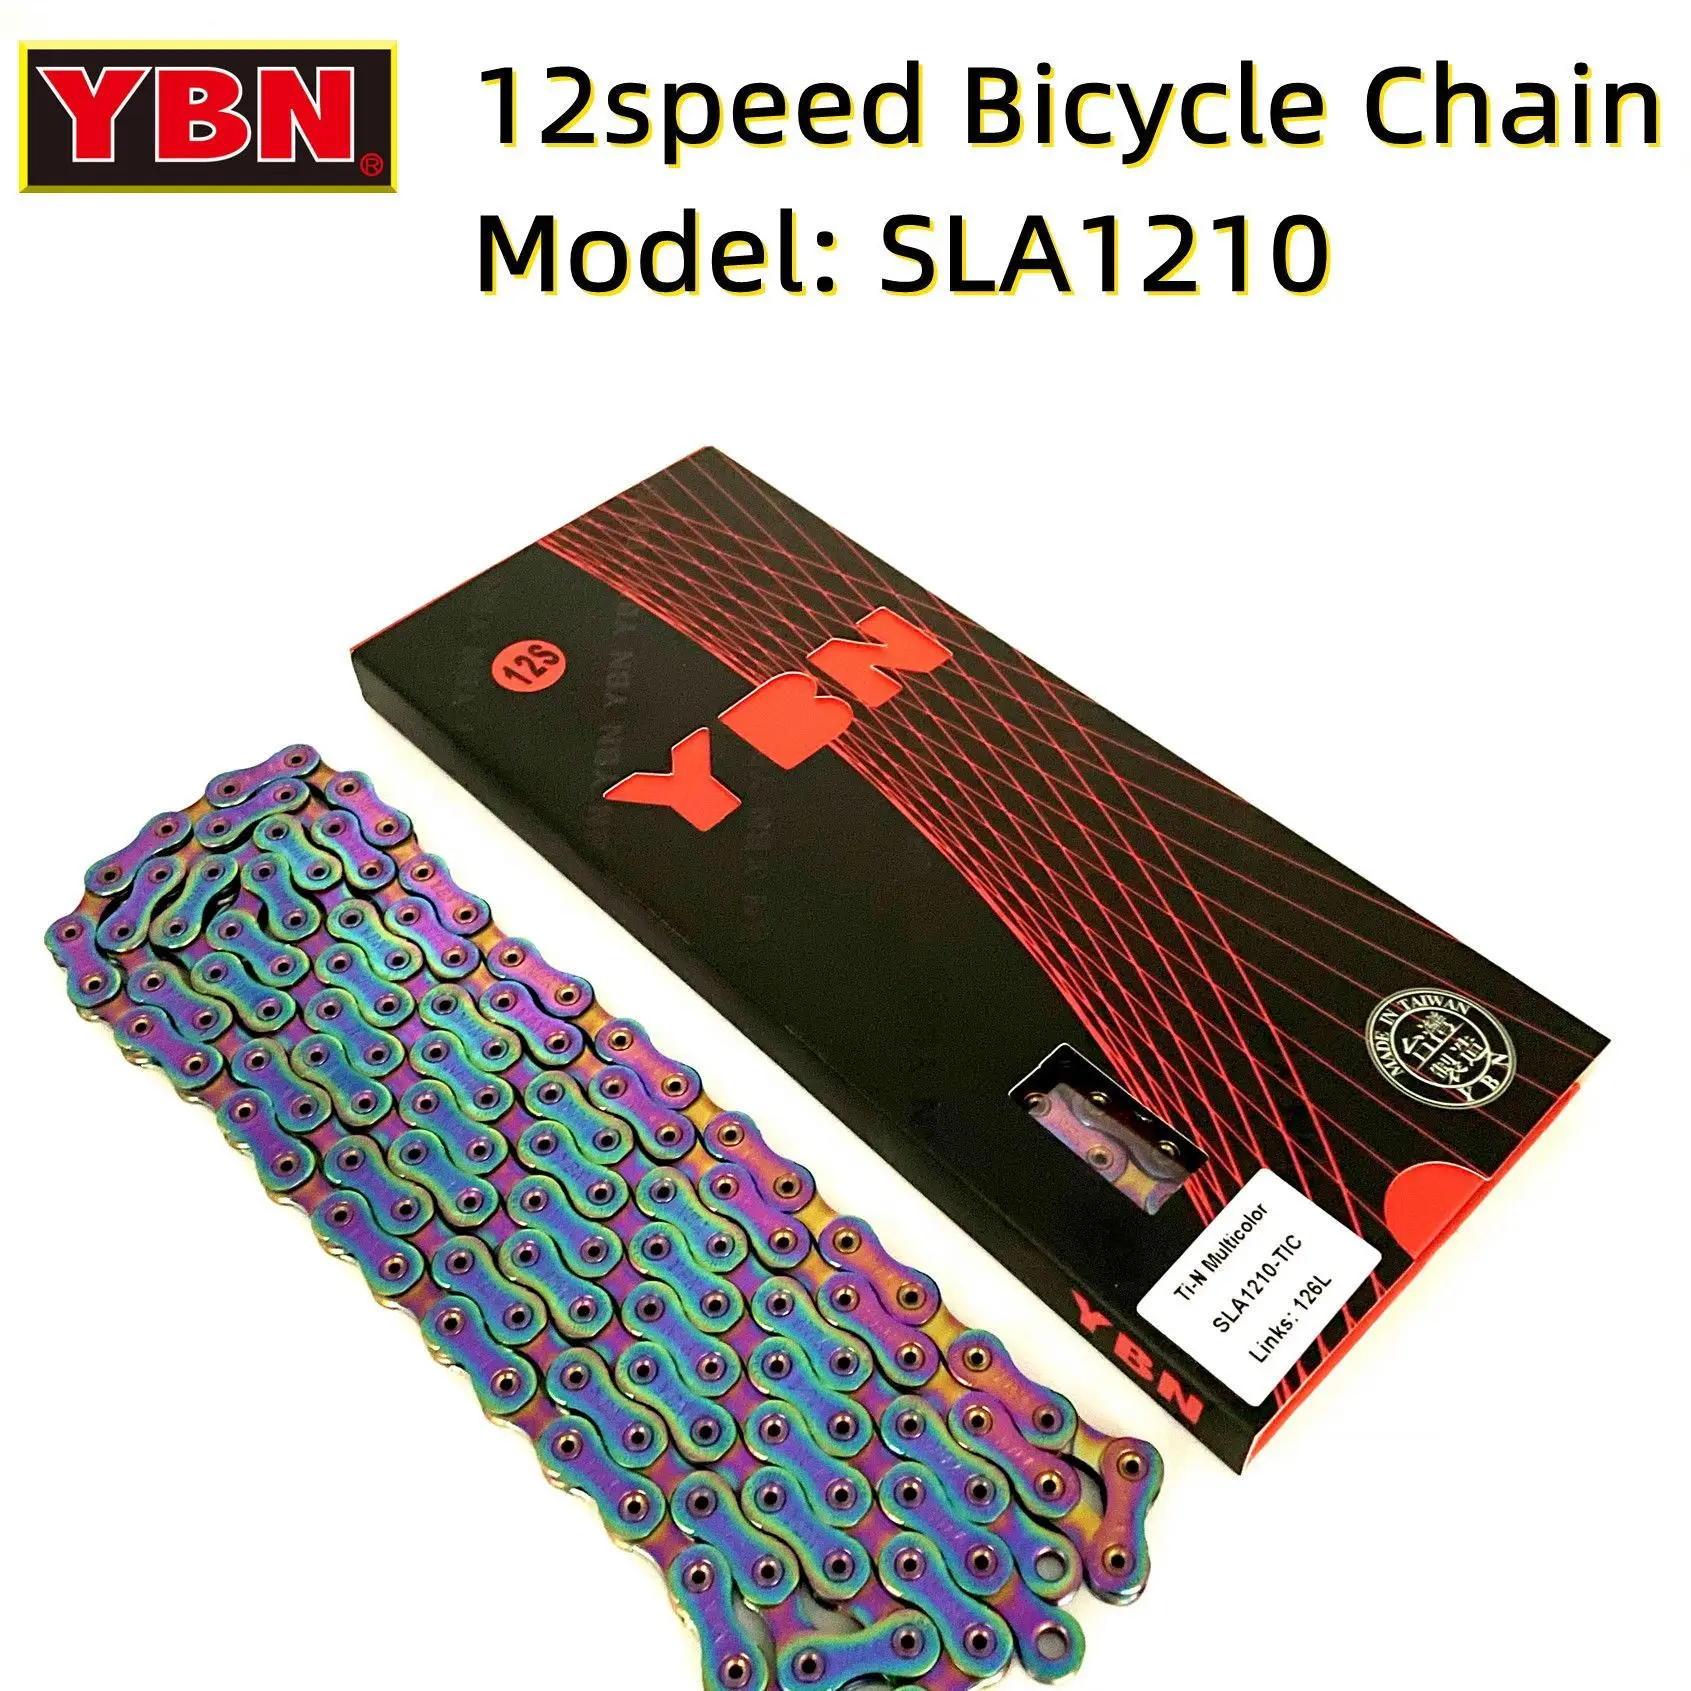 YBN 12 Speed Bicycle Chain SLA1210 Non-stick Coating Universal MTB Road Bike Colorful Chain for SRAM/Campanolo System Bike Parts